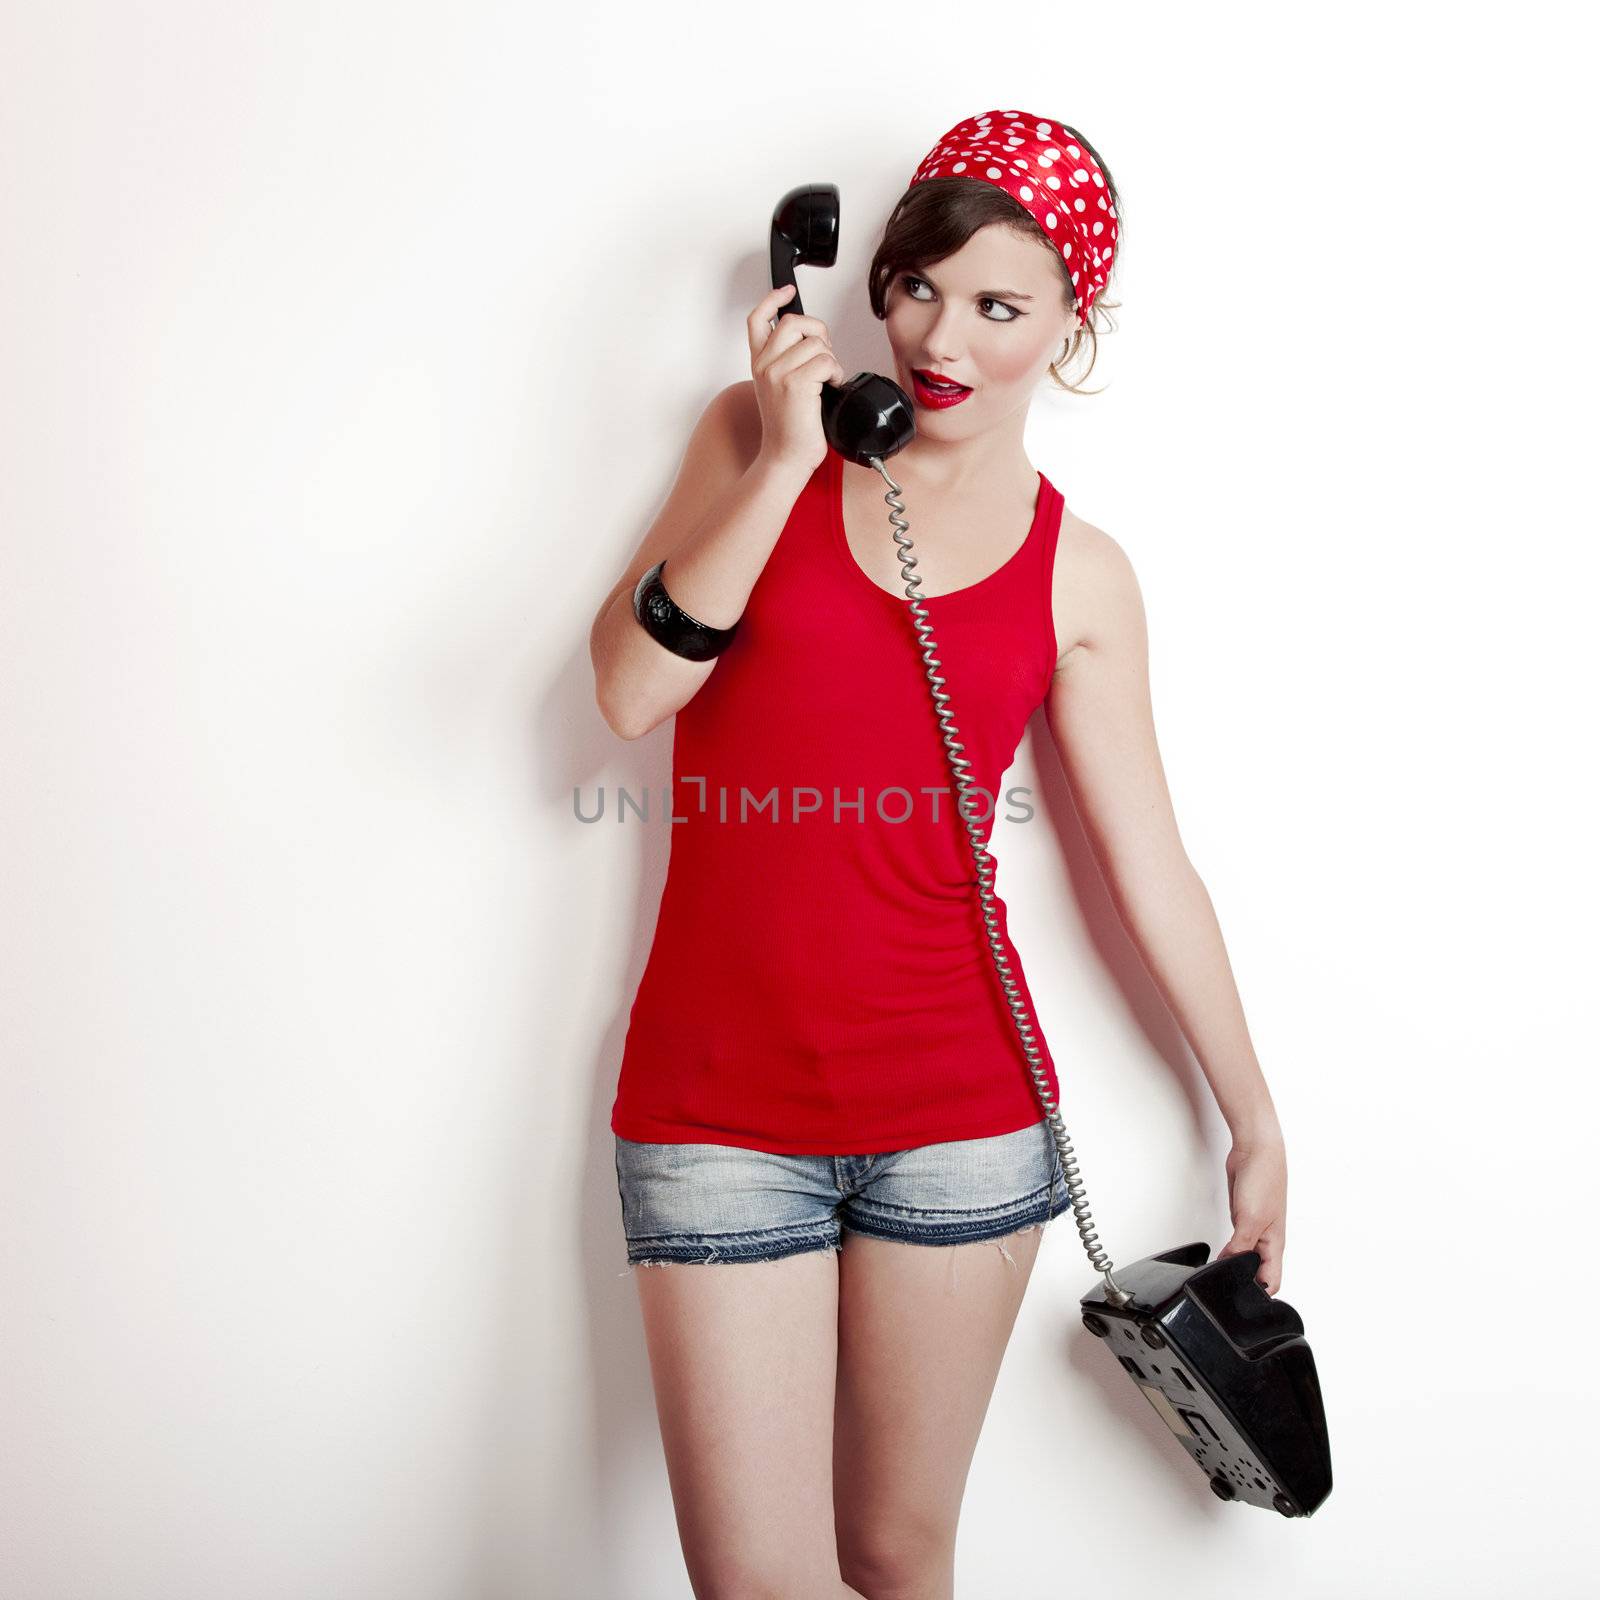 Girl with a vintage phone by Iko